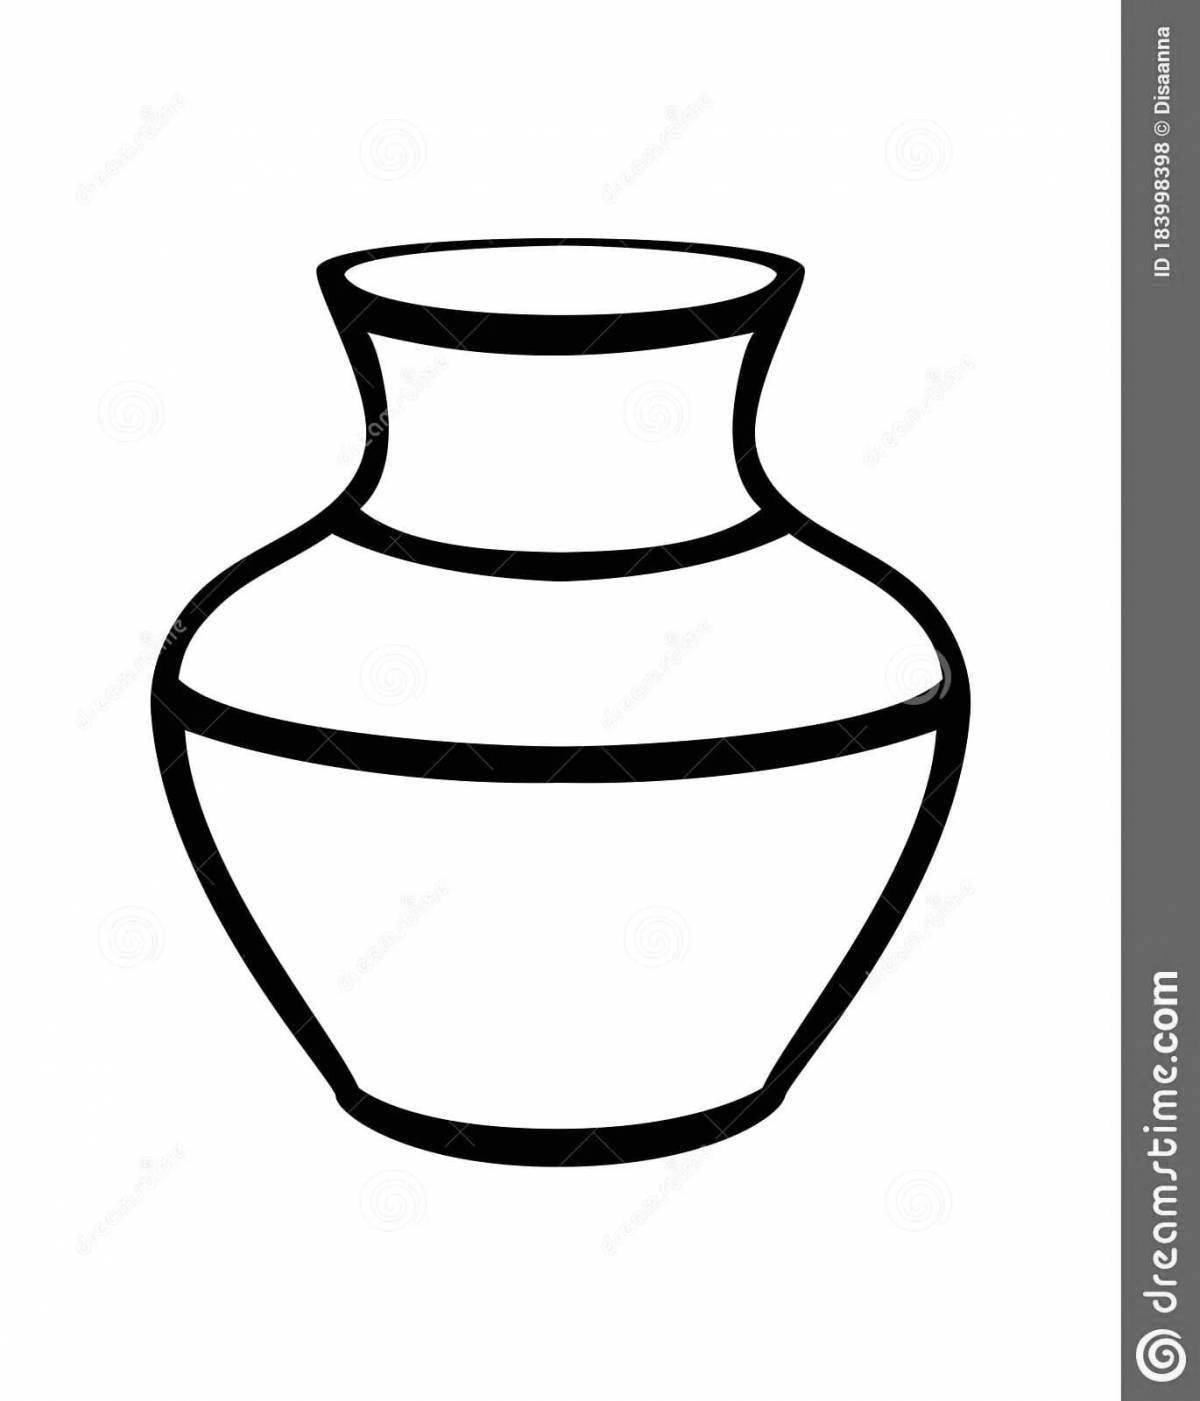 Playful vase coloring page